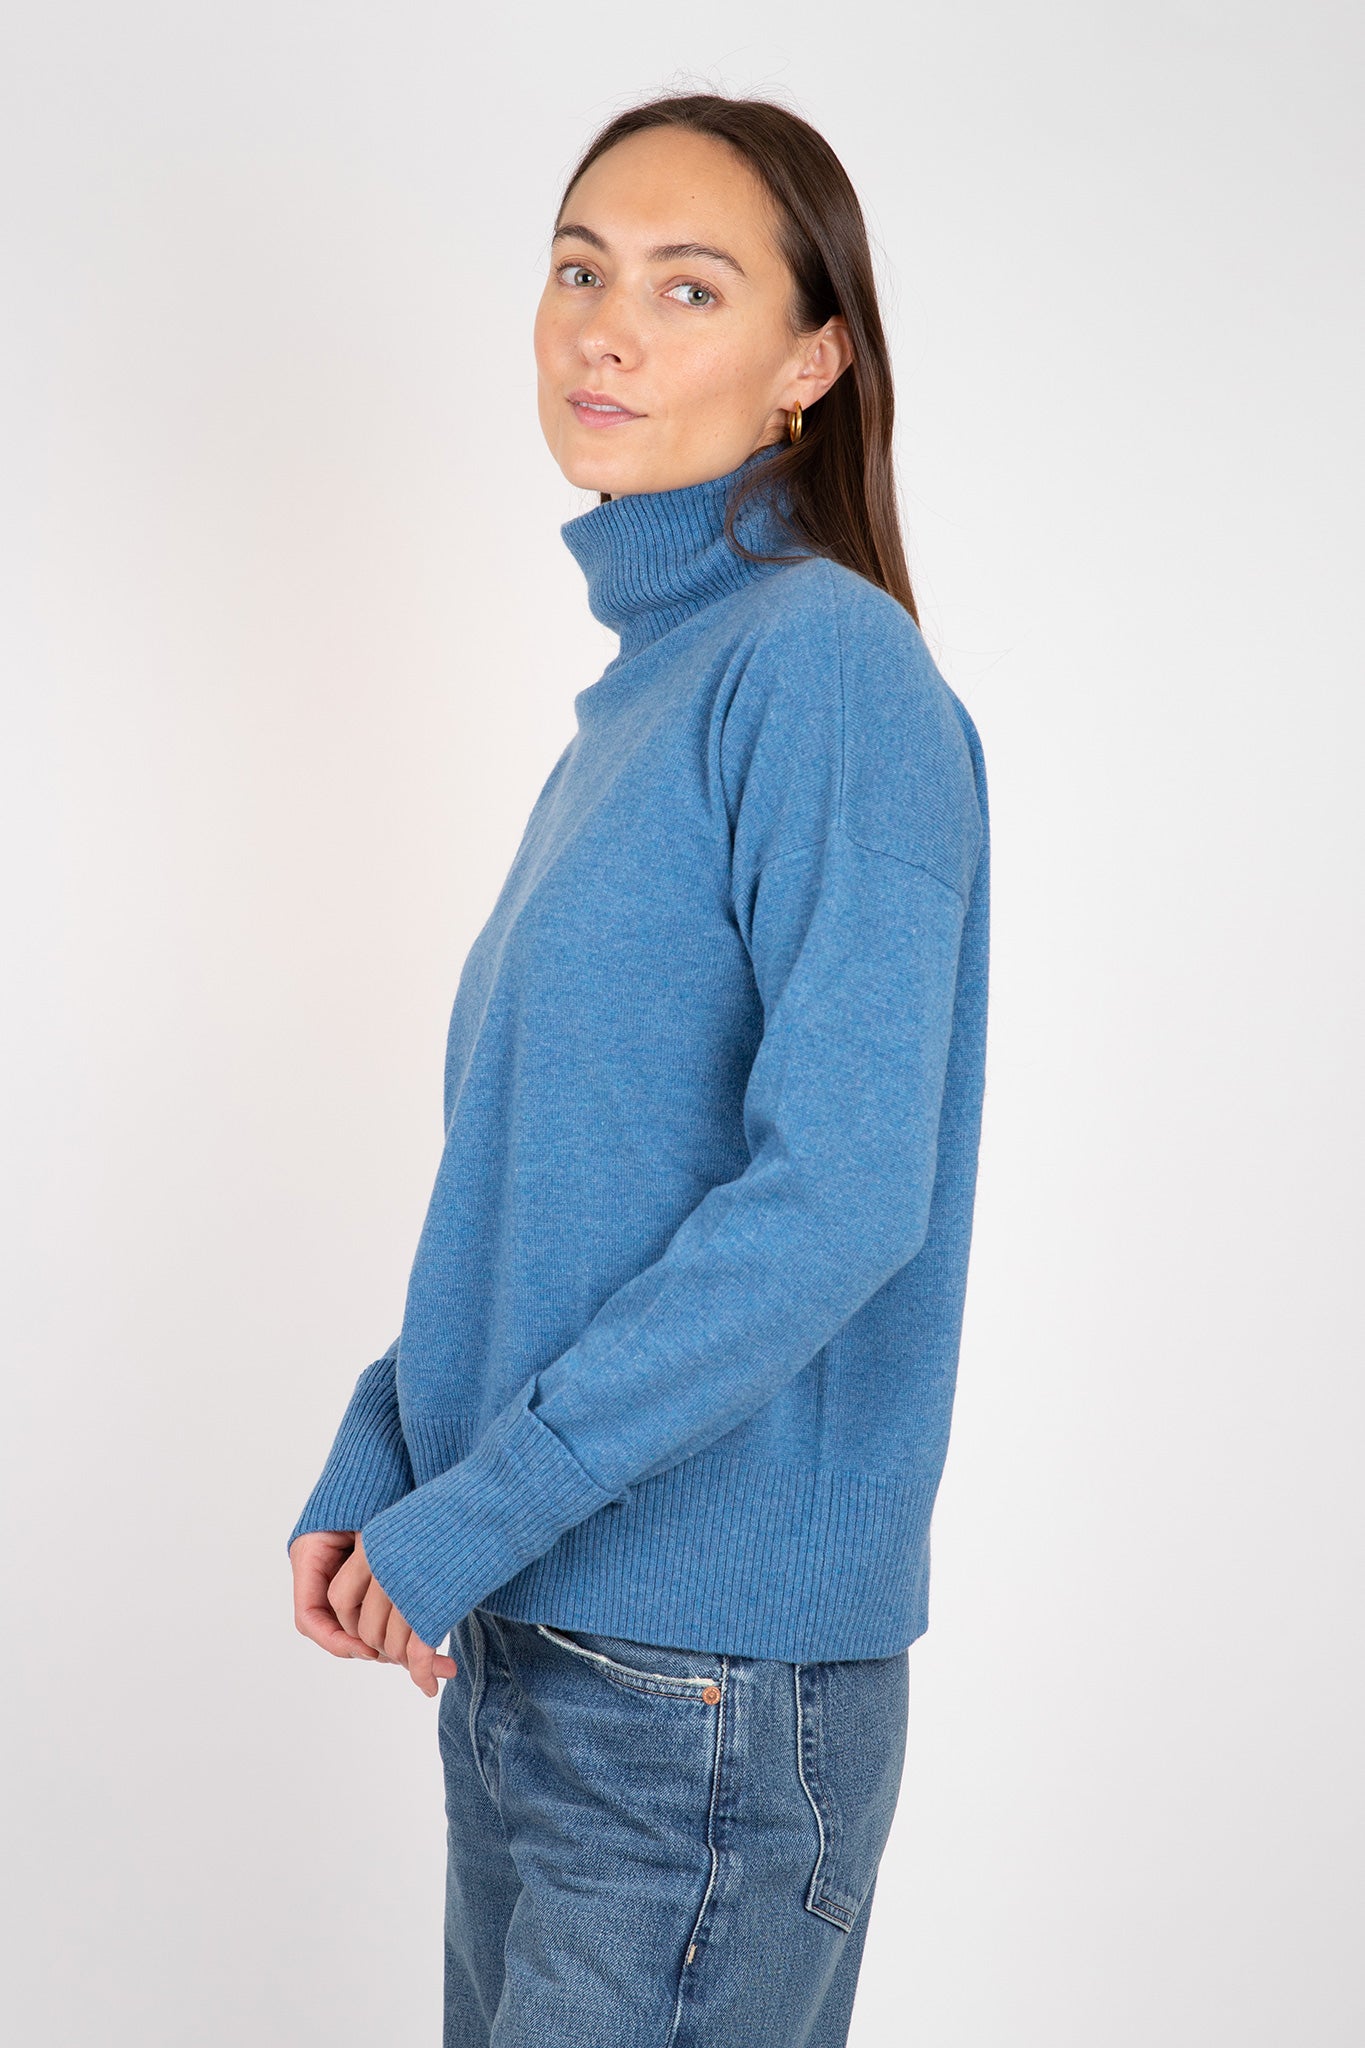    Autumn-Cashmere-Relaxed-Mock-Neck-Sweater-Mariner